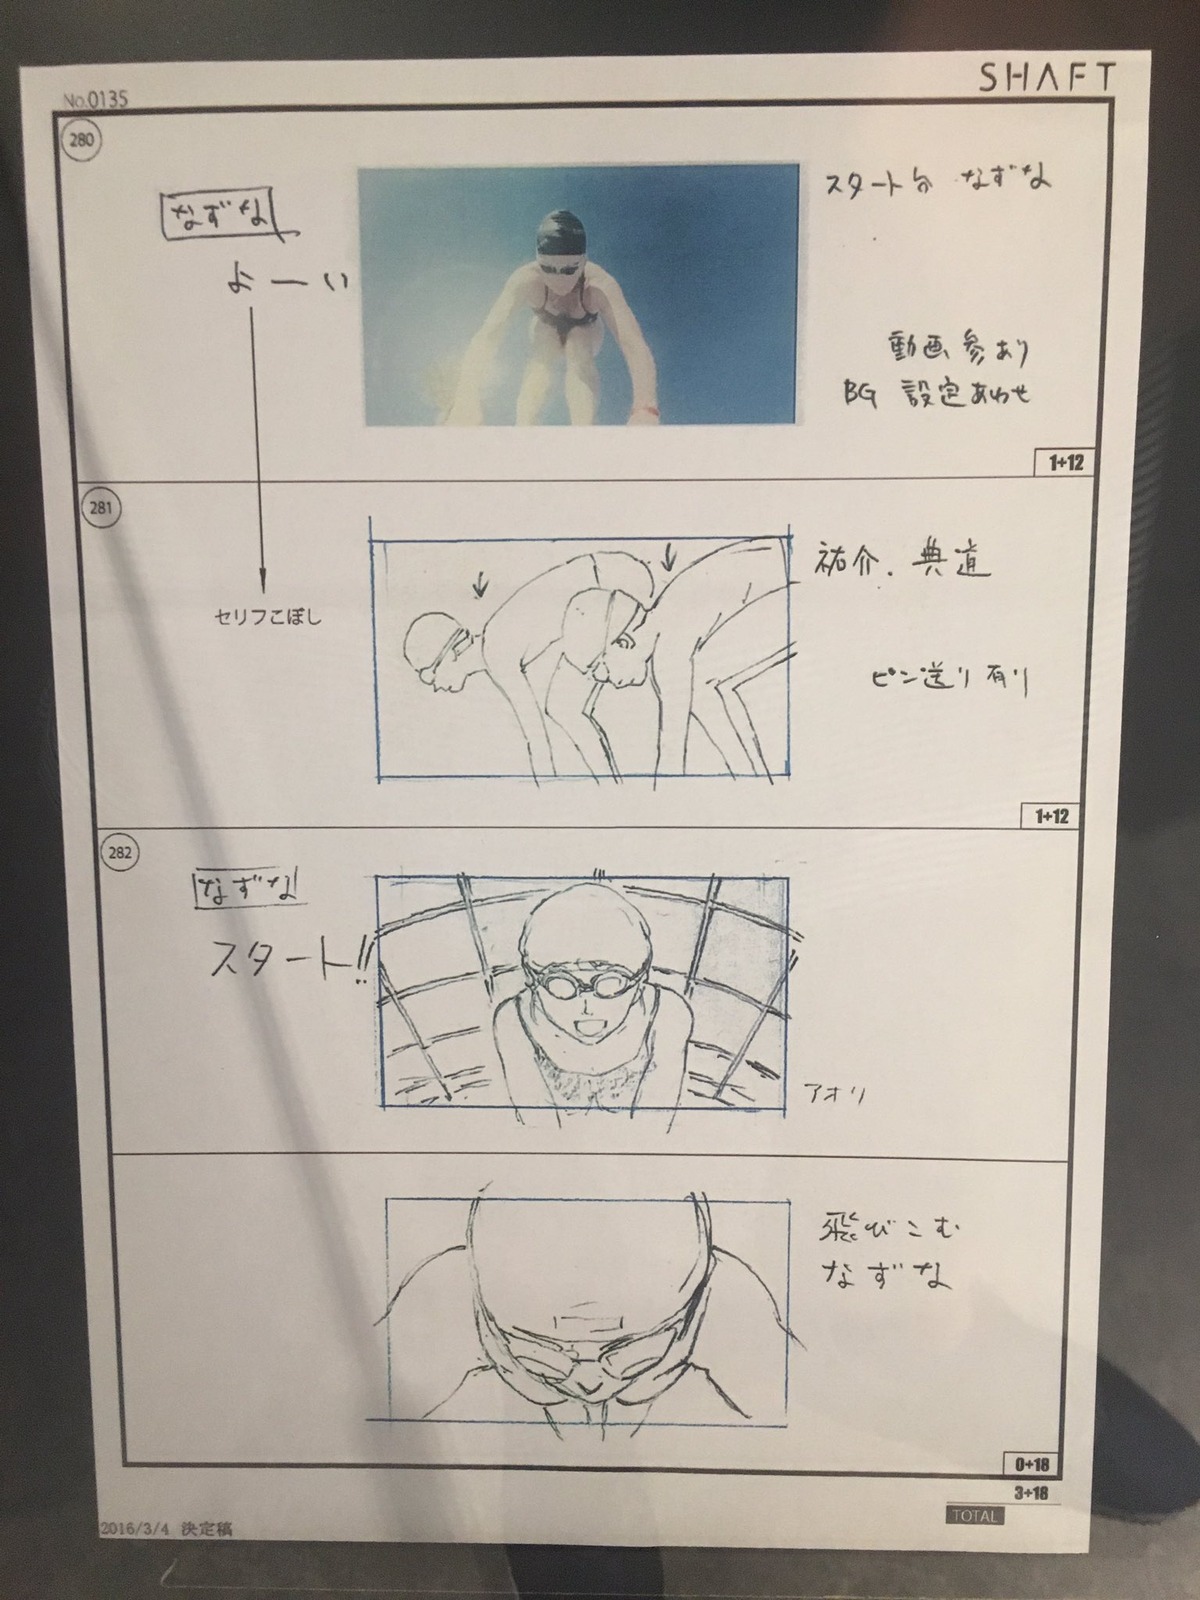 fireworks_should_we_see_it_from_the_side_or_the_bottom? nobuyuki_takeuchi production_materials storyboard